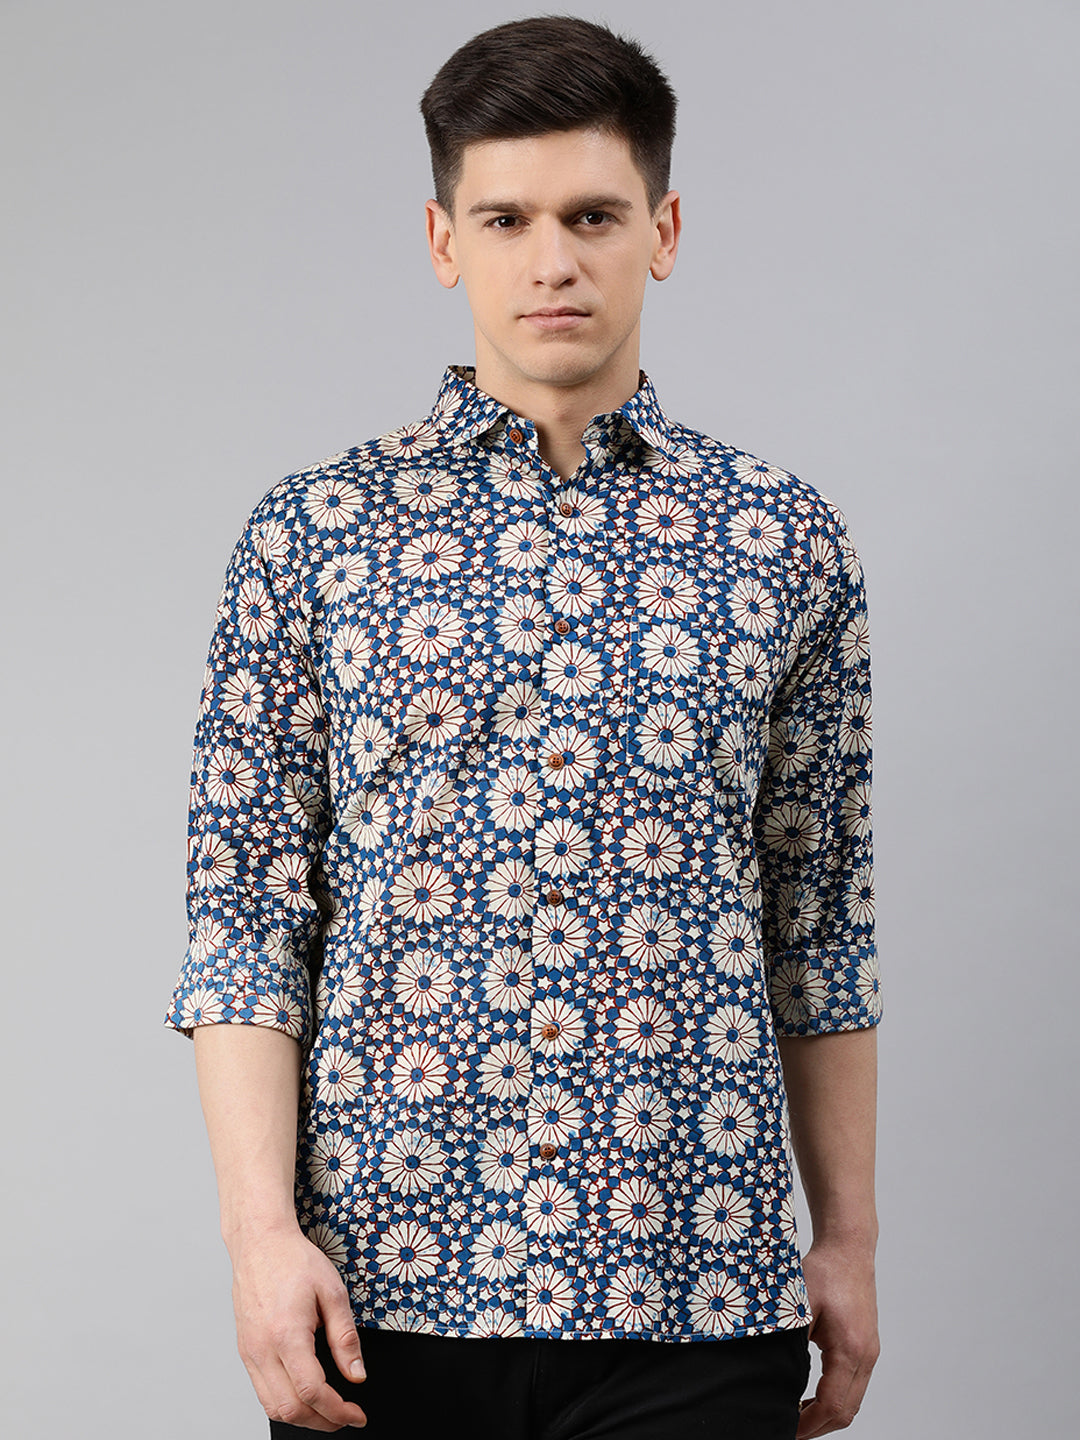 Blue Cotton Full Sleeves Shirts For Men-MMF024 - NOZ2TOZ